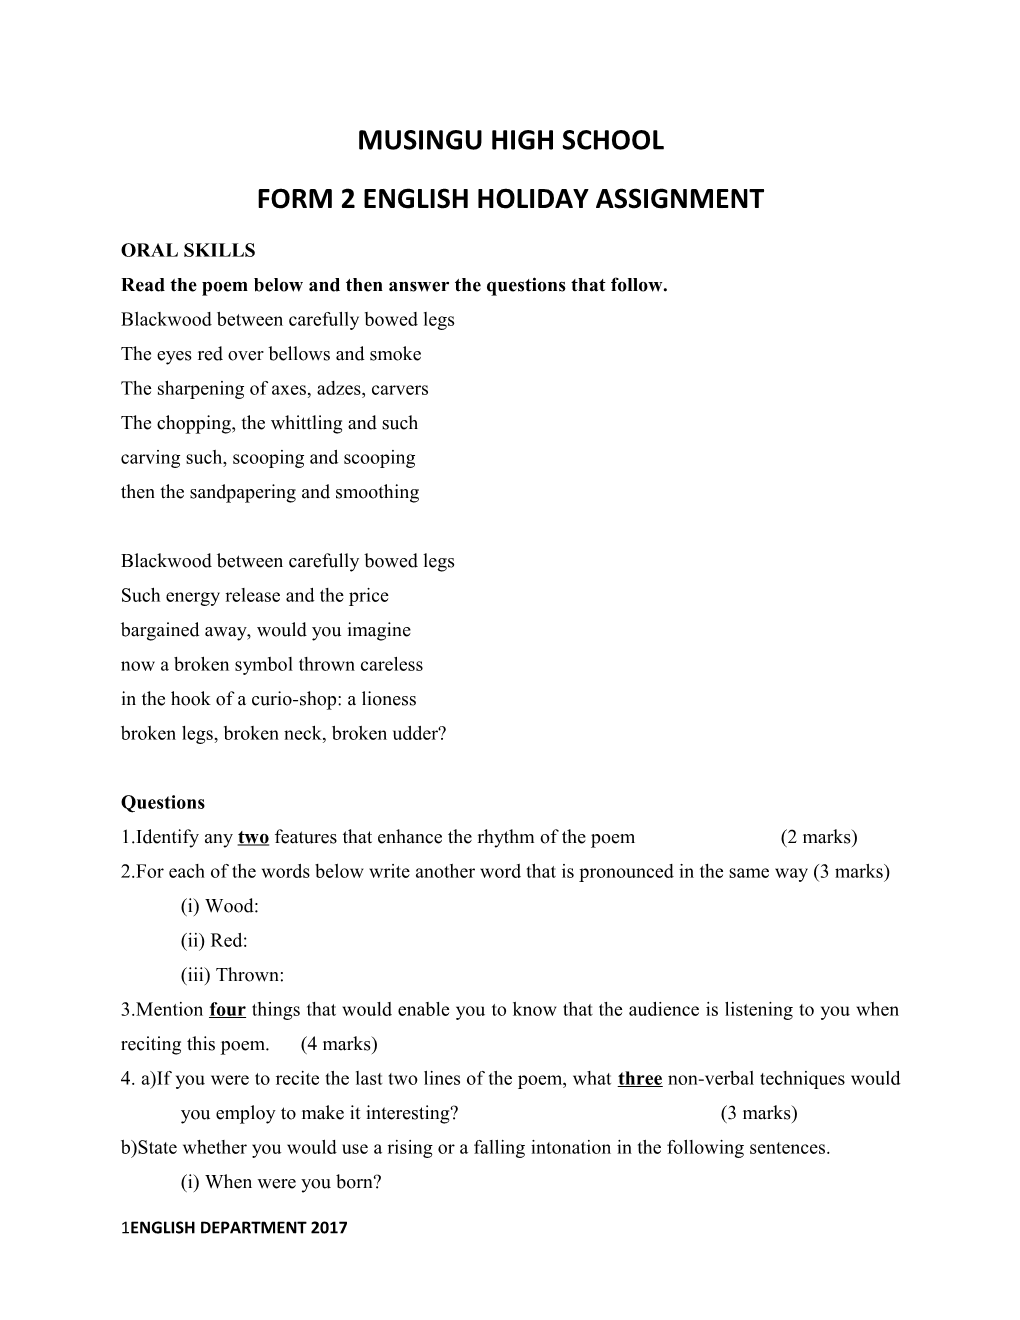 Form 2 English Holiday Assignment